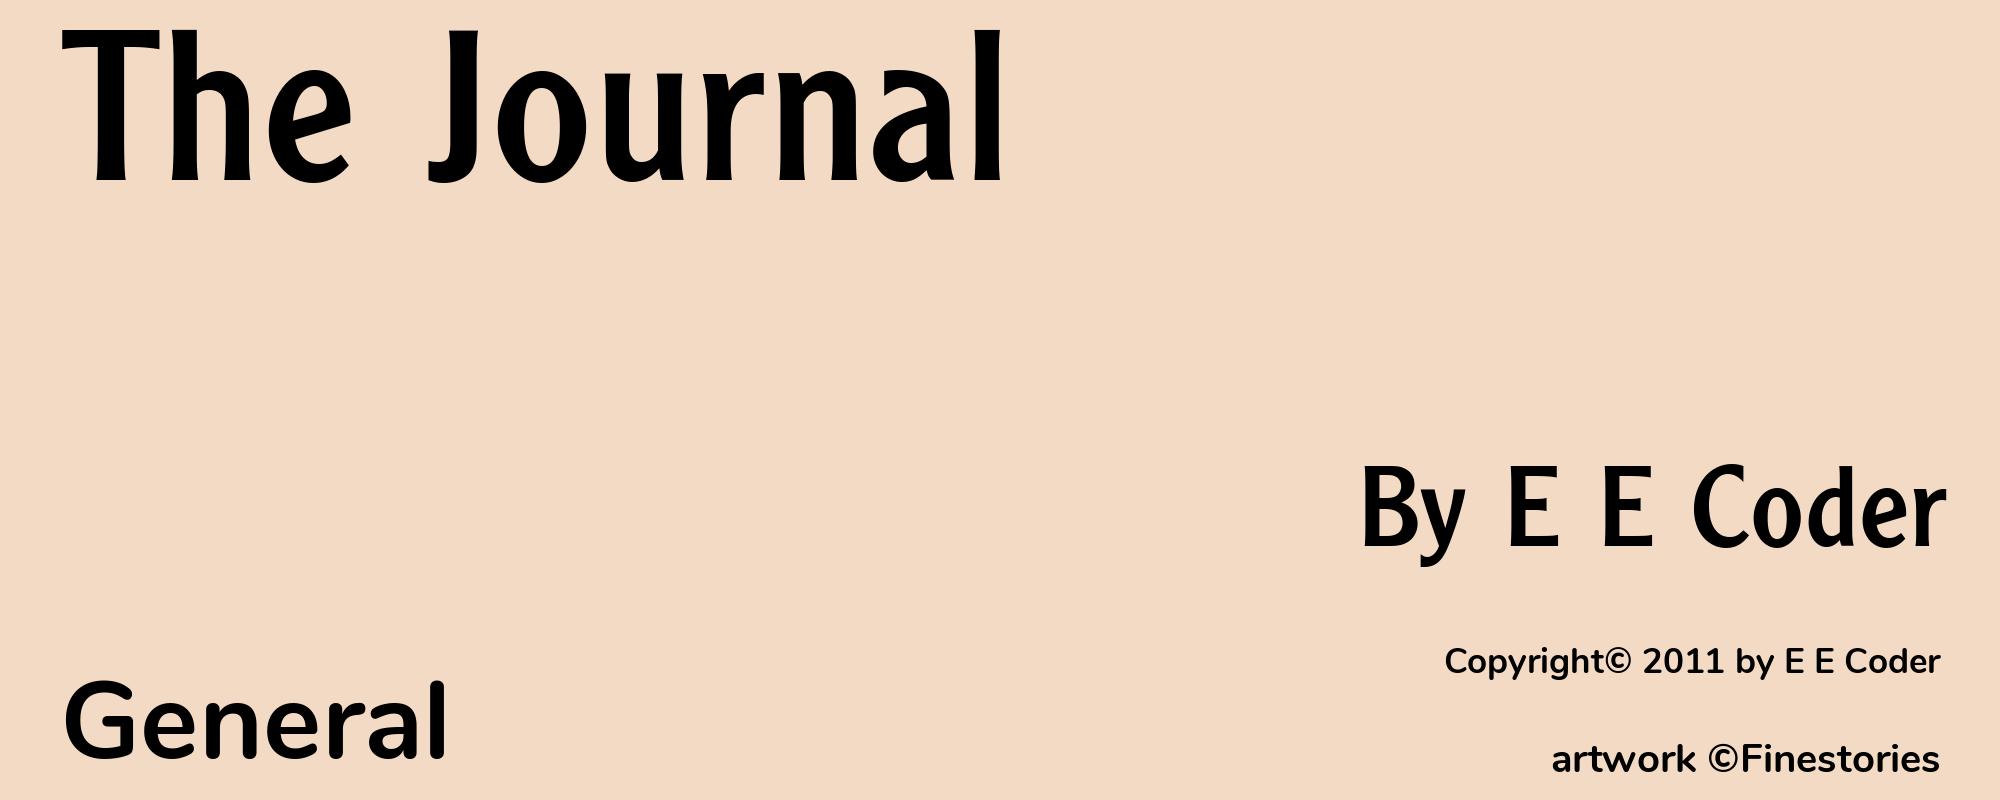 The Journal - Cover